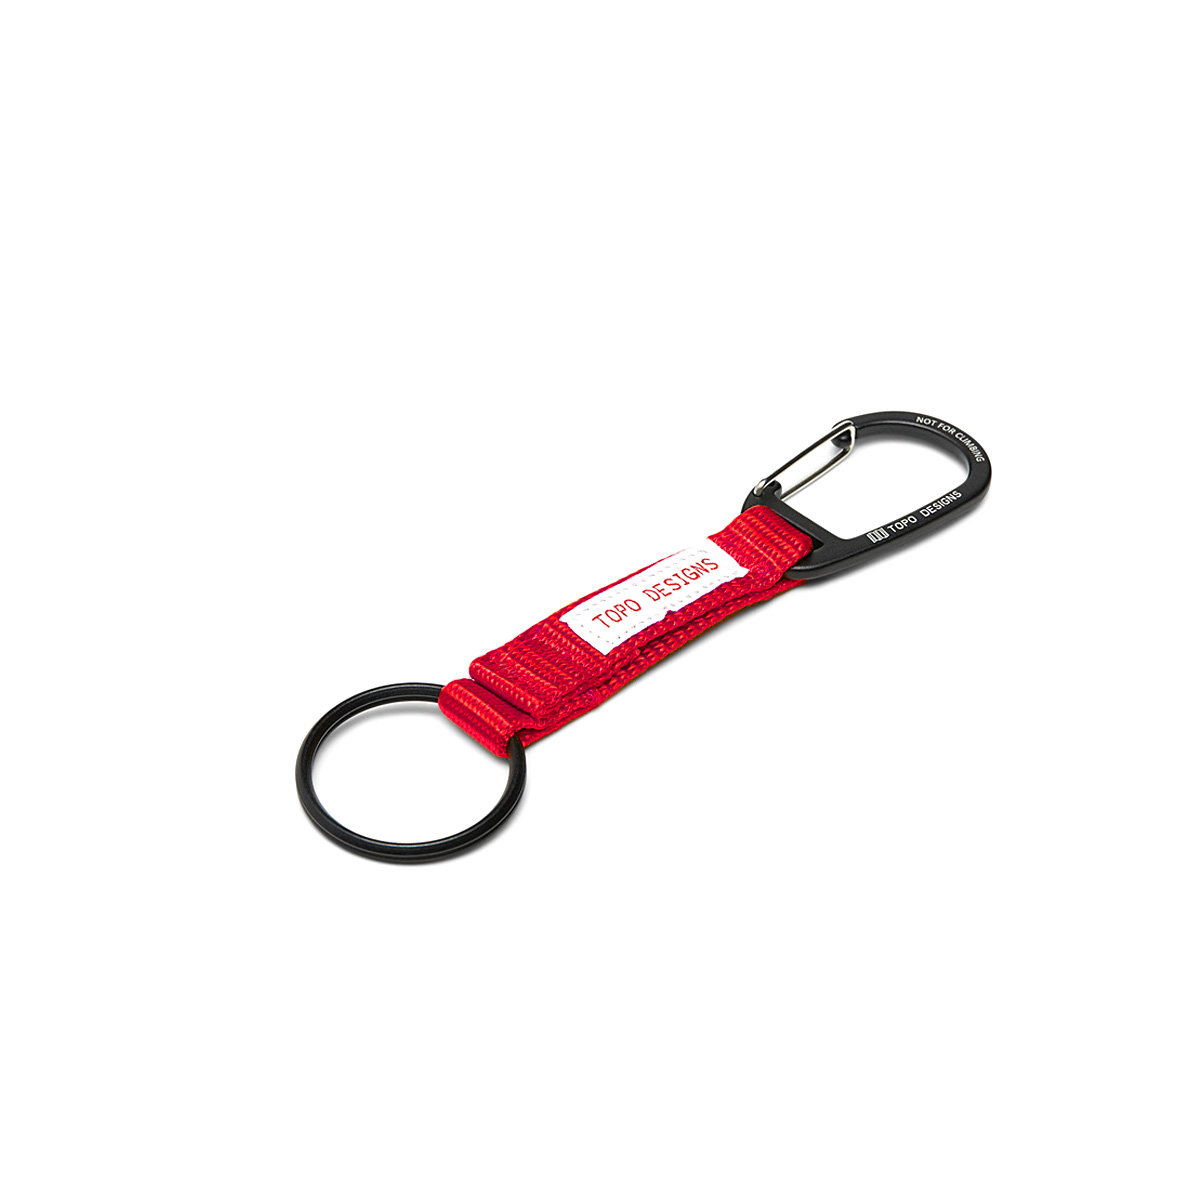 Topo Designs Key Clip Red, keep keys handy and visible with the Key Clip